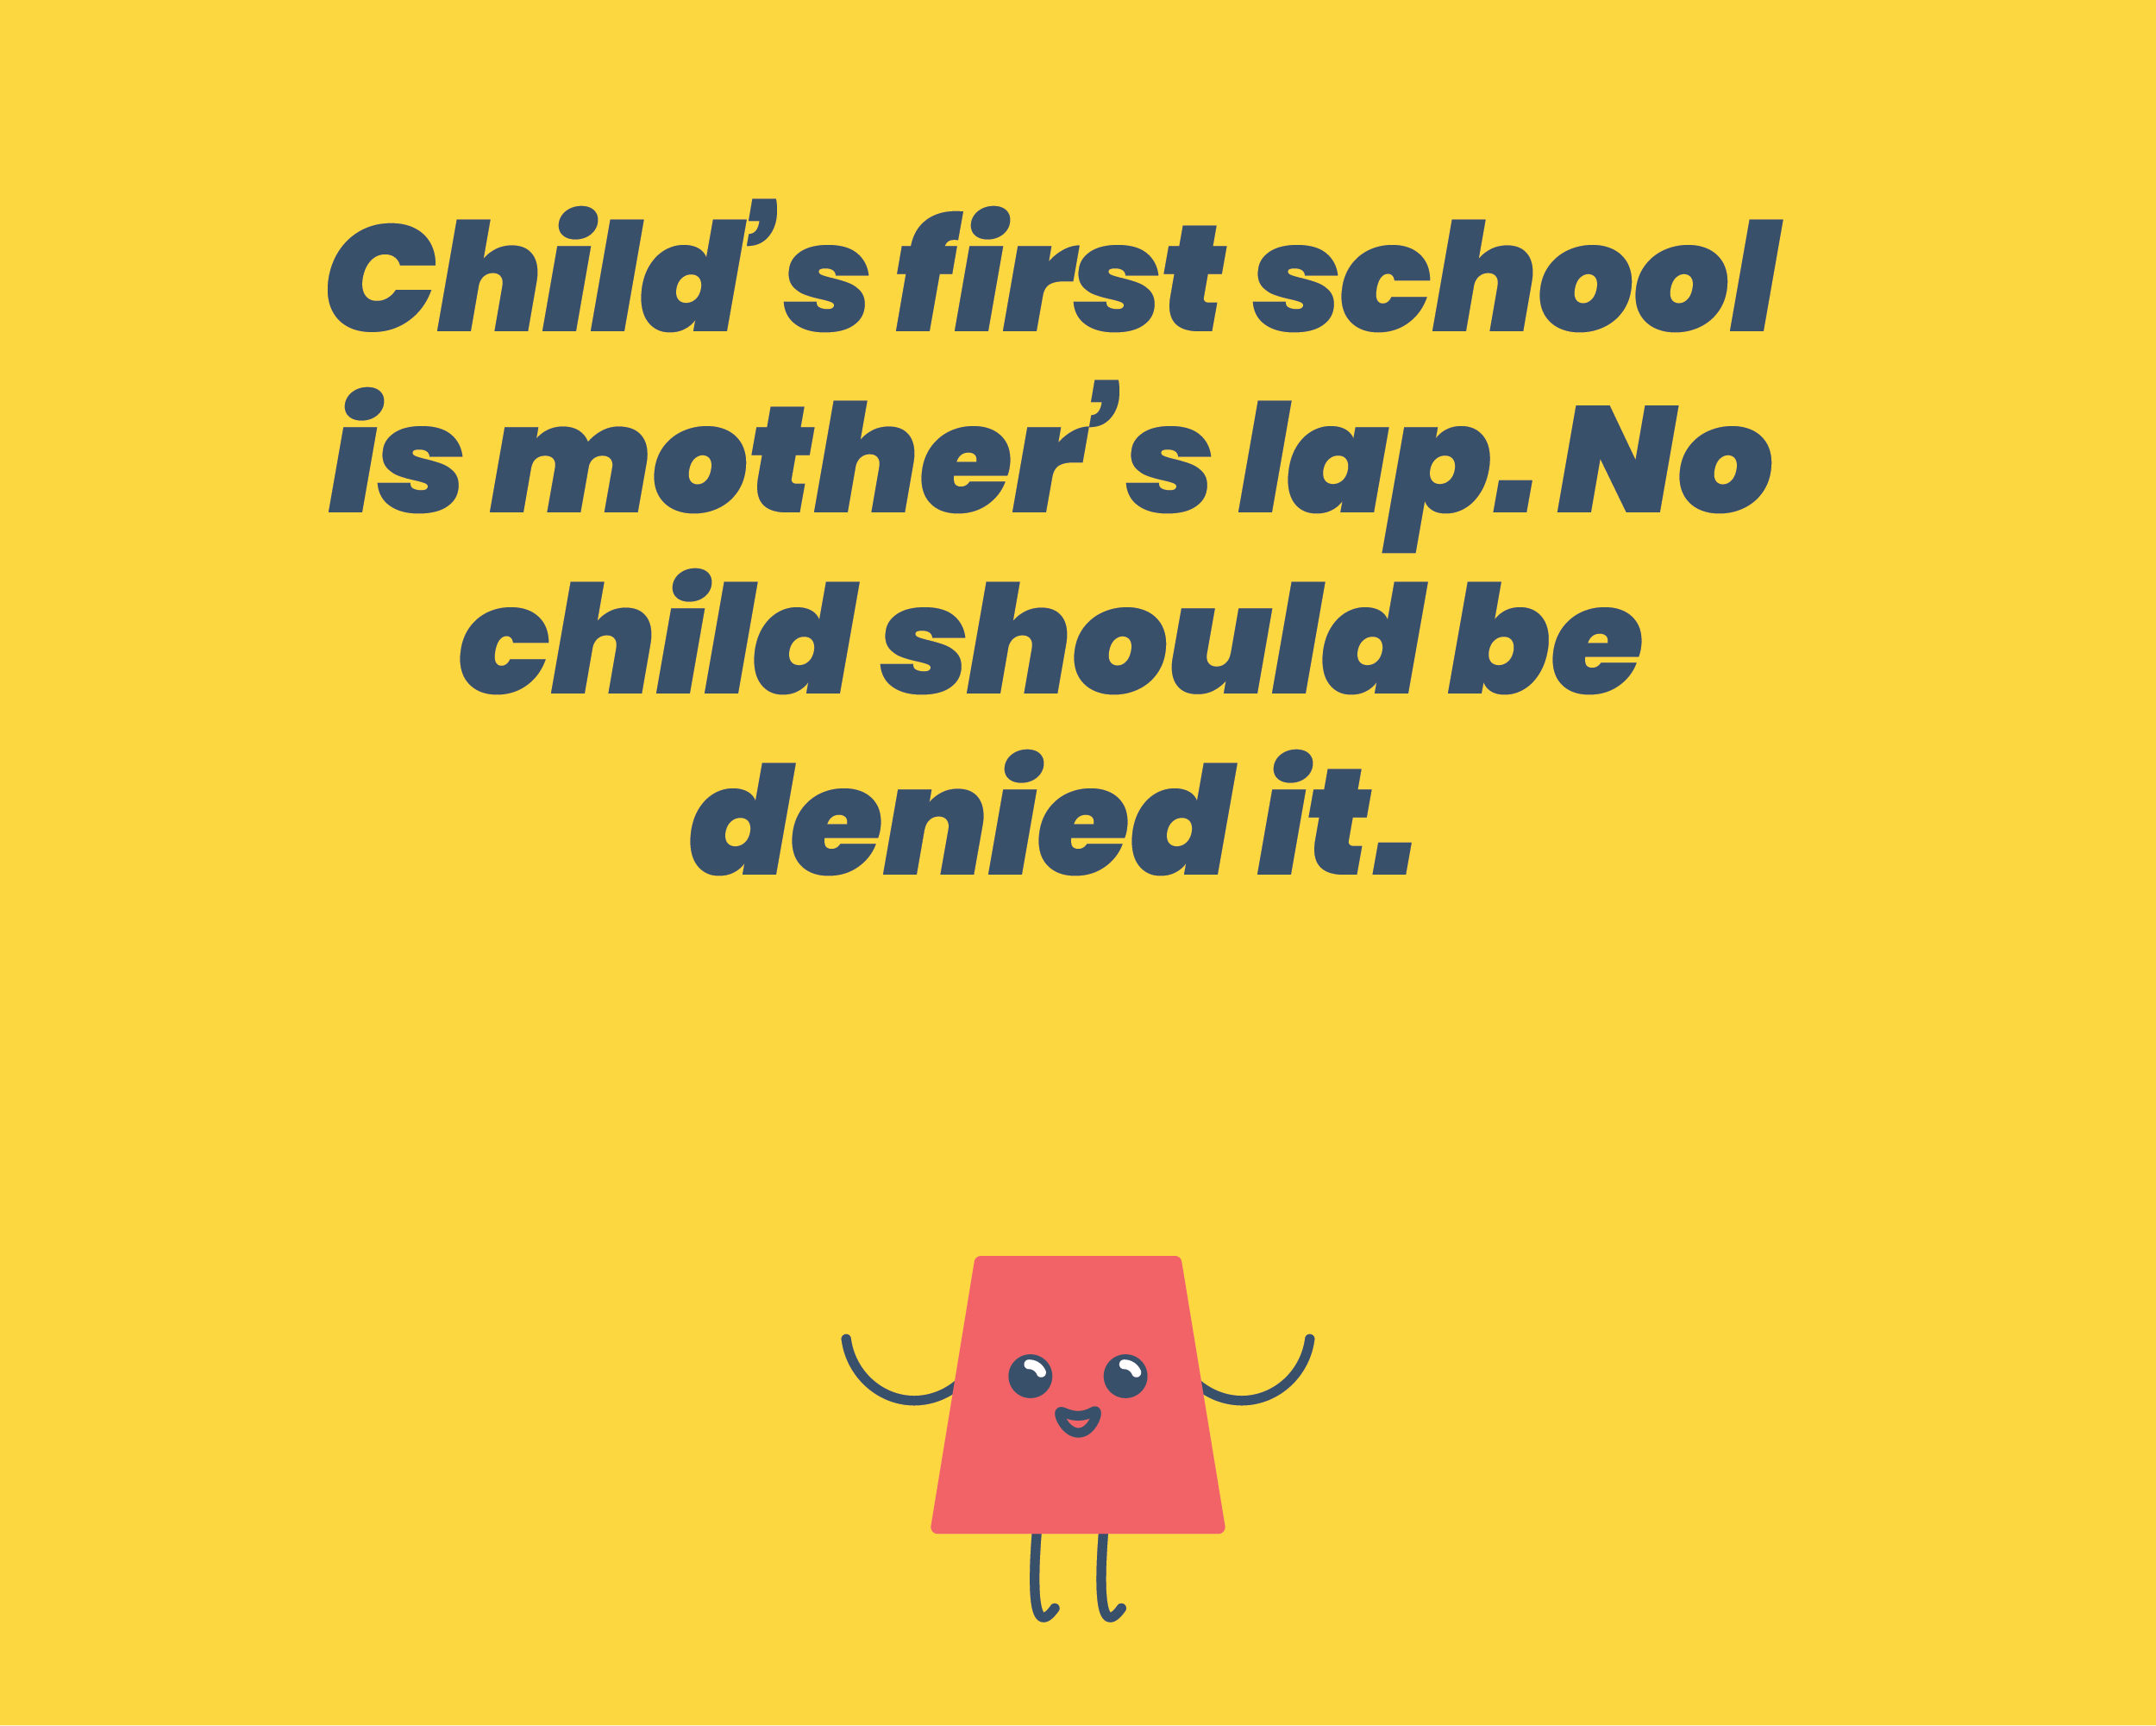 Child’s first school is mother’s lap. No child should be denied it.